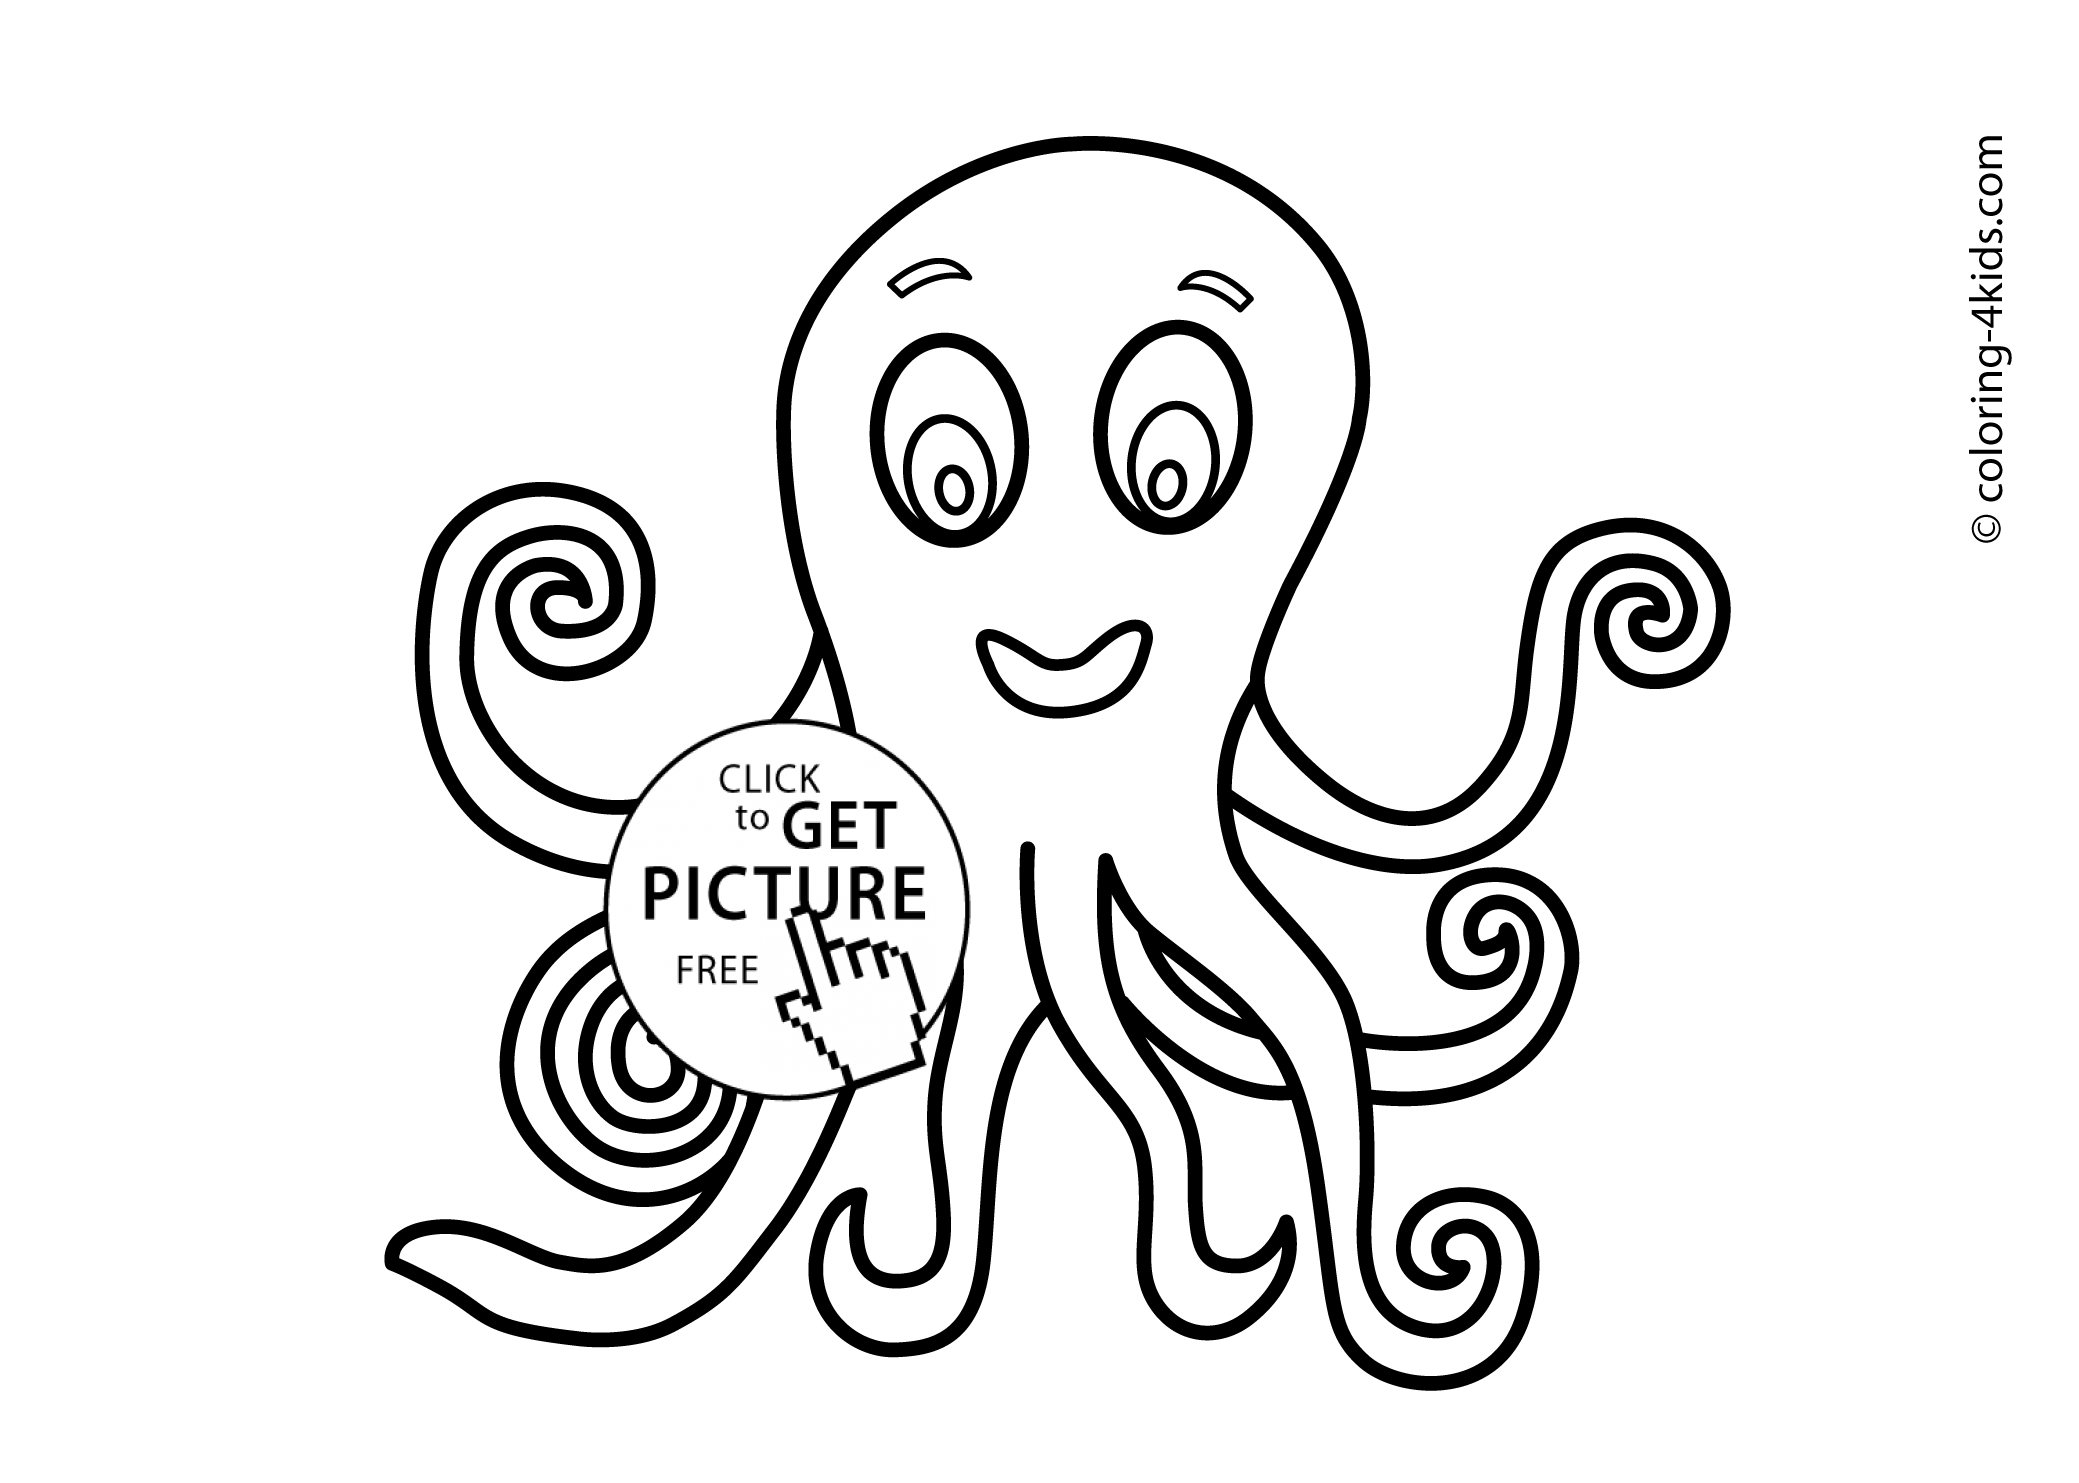 Octopus Animals coloring pages for kids, printable free | coloing ...